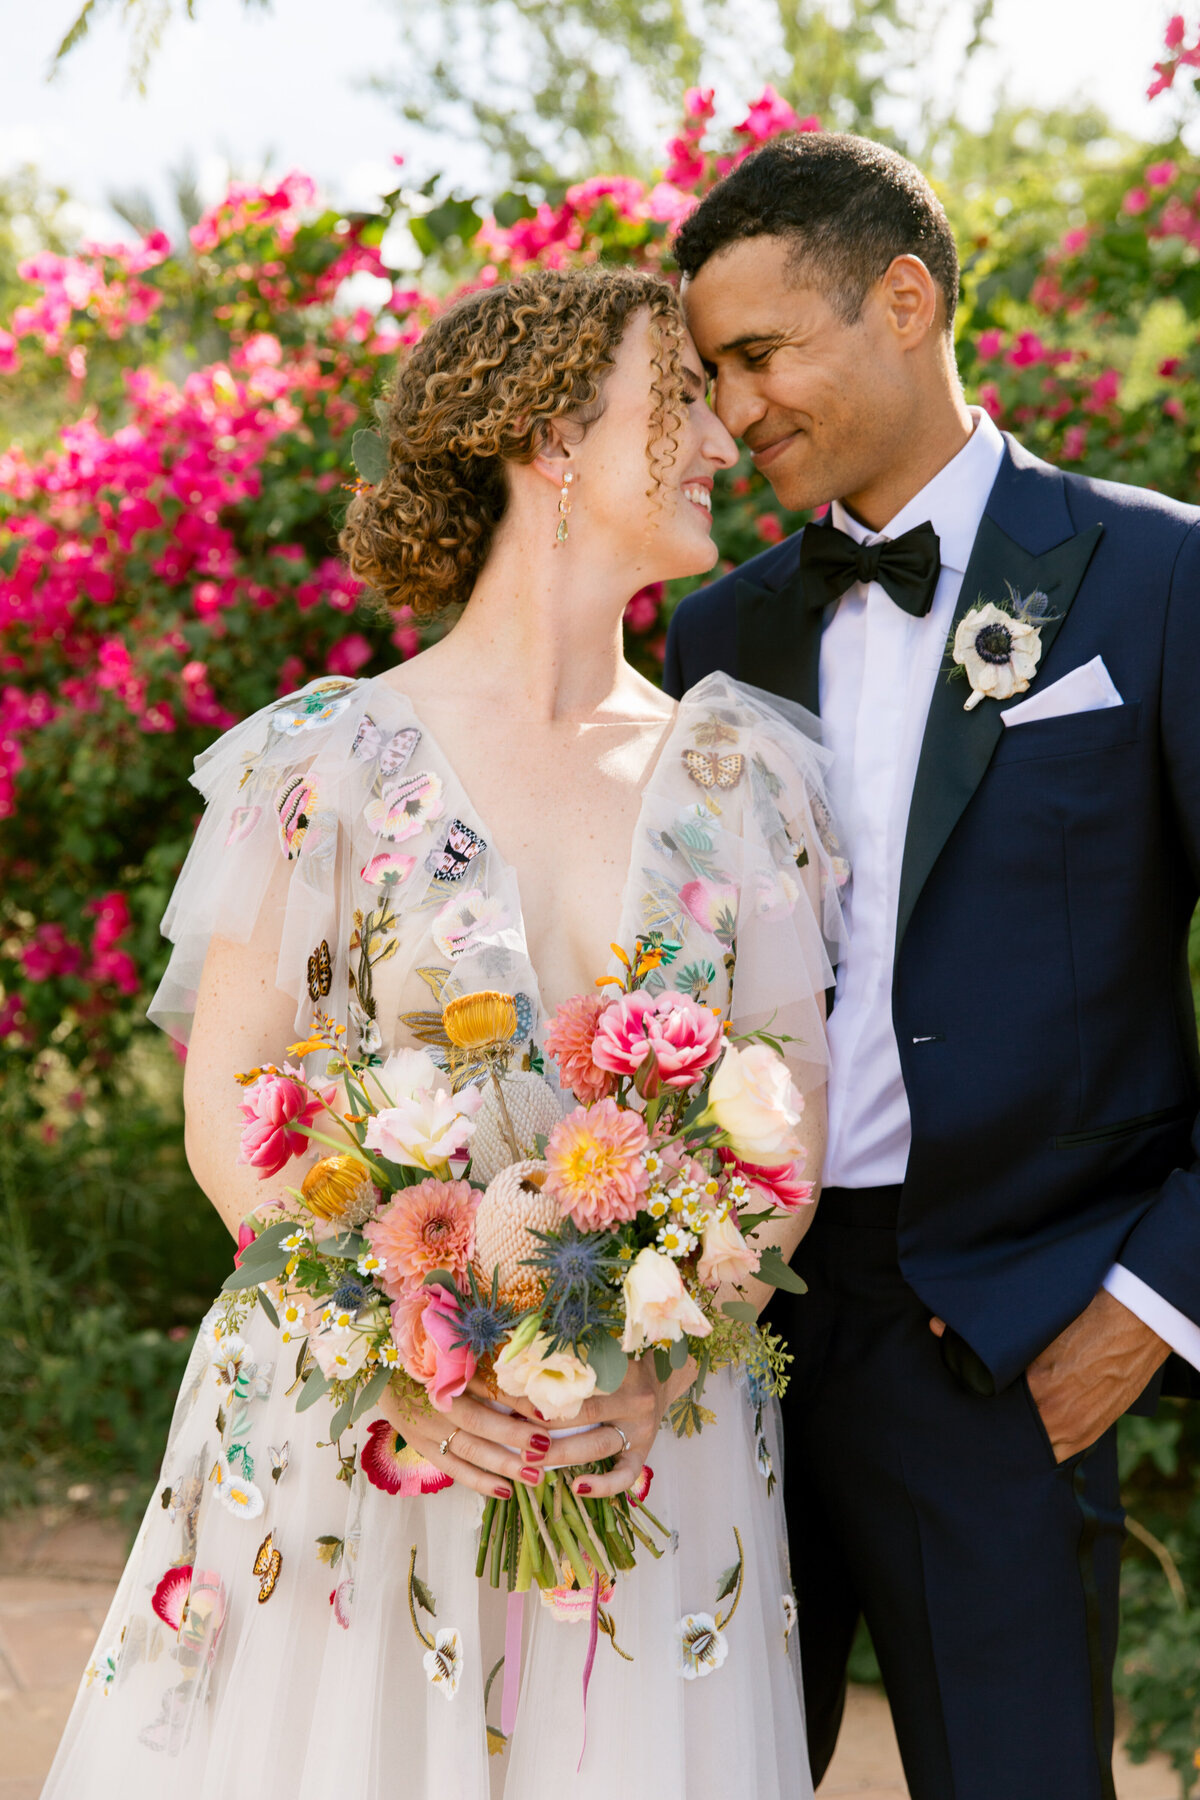 Bride and groom nuzzle noses on their wedding day. The bride is holding a colorful wedding bouquet and she is wearing a colorful appliques floral Claire Pettibone wedding dress.